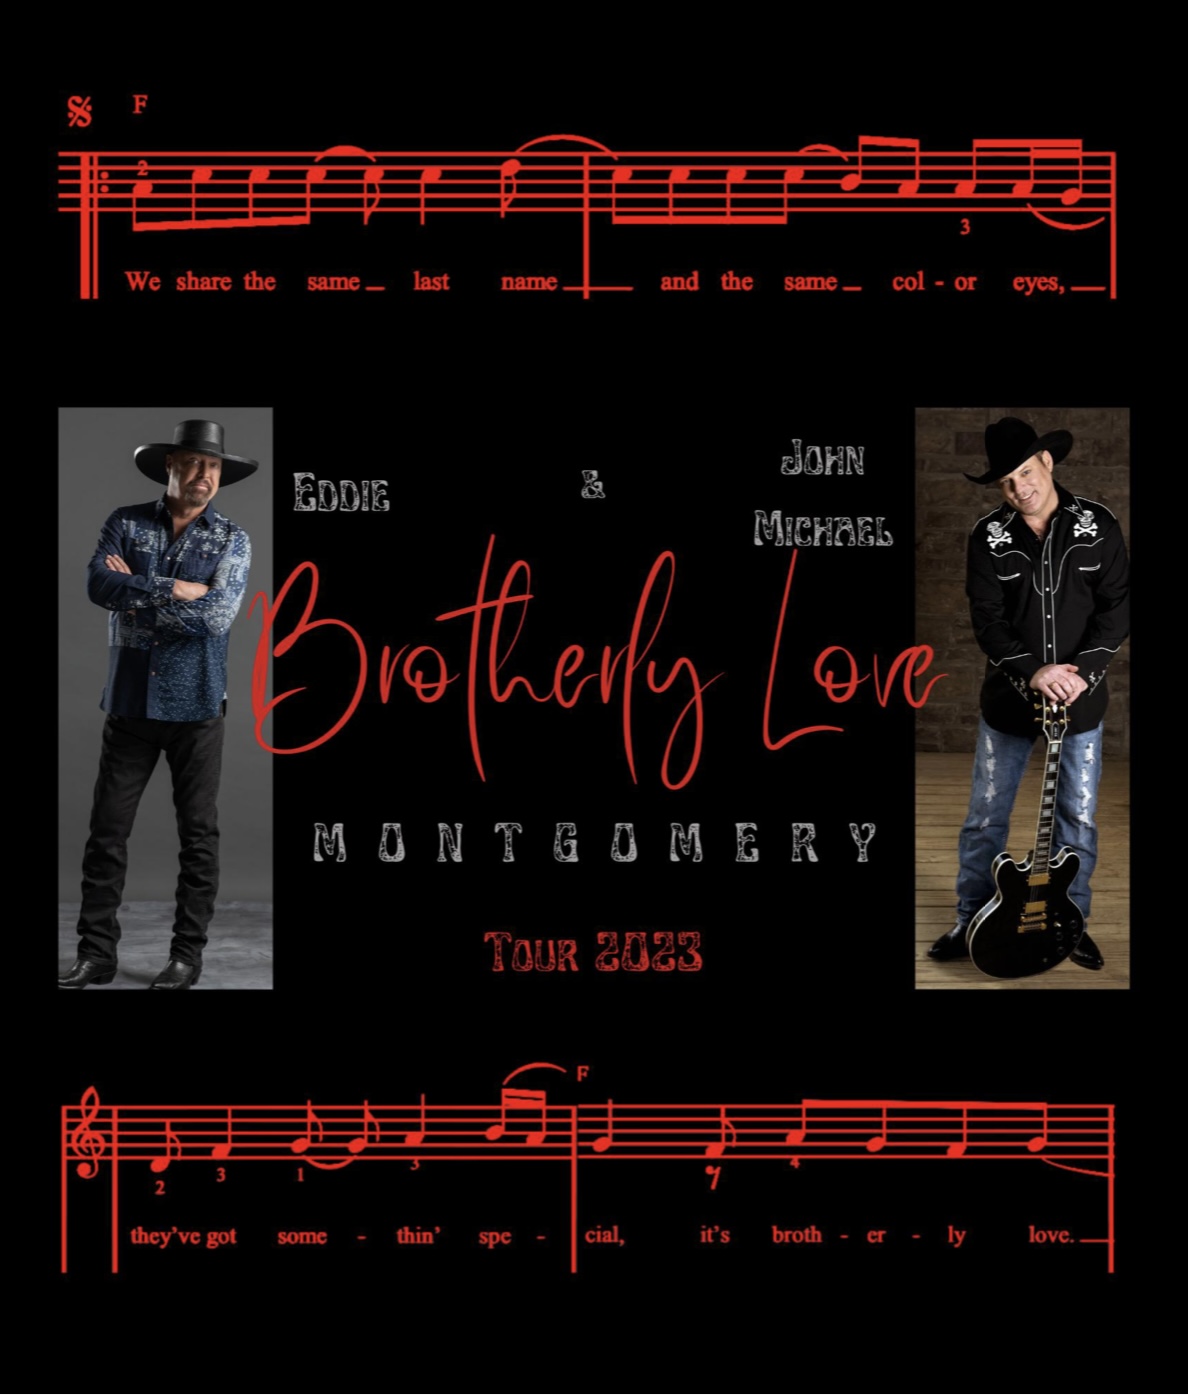 Brotherly Love Tour, with John Michael Montgomery and Eddie Montgomery of Montgomery Gentry